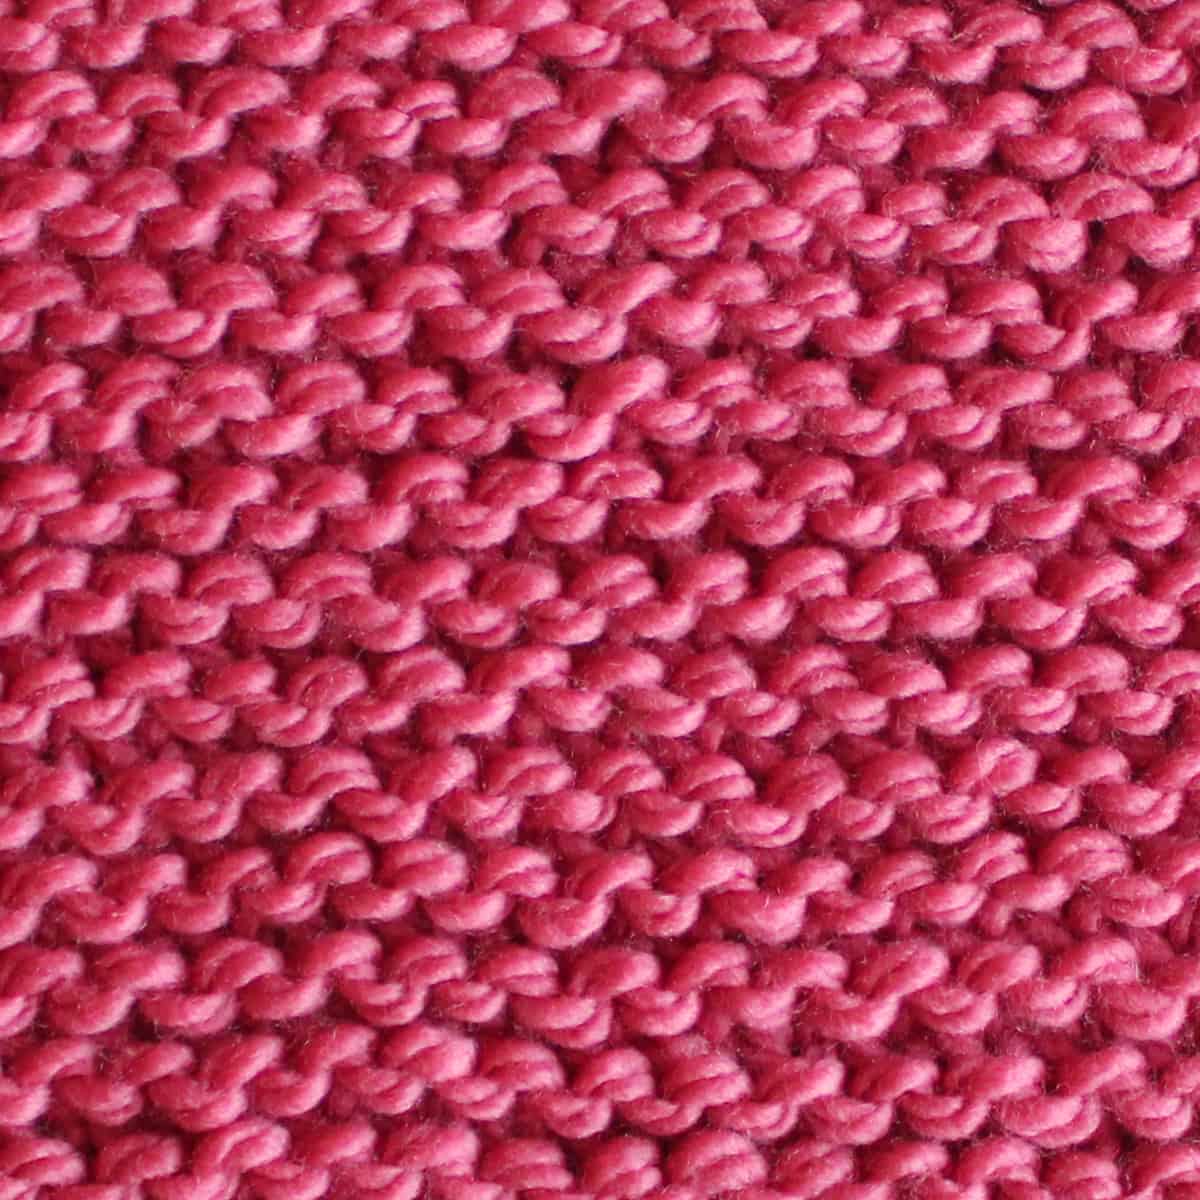 Garter stitch knitted in pink color yarn.